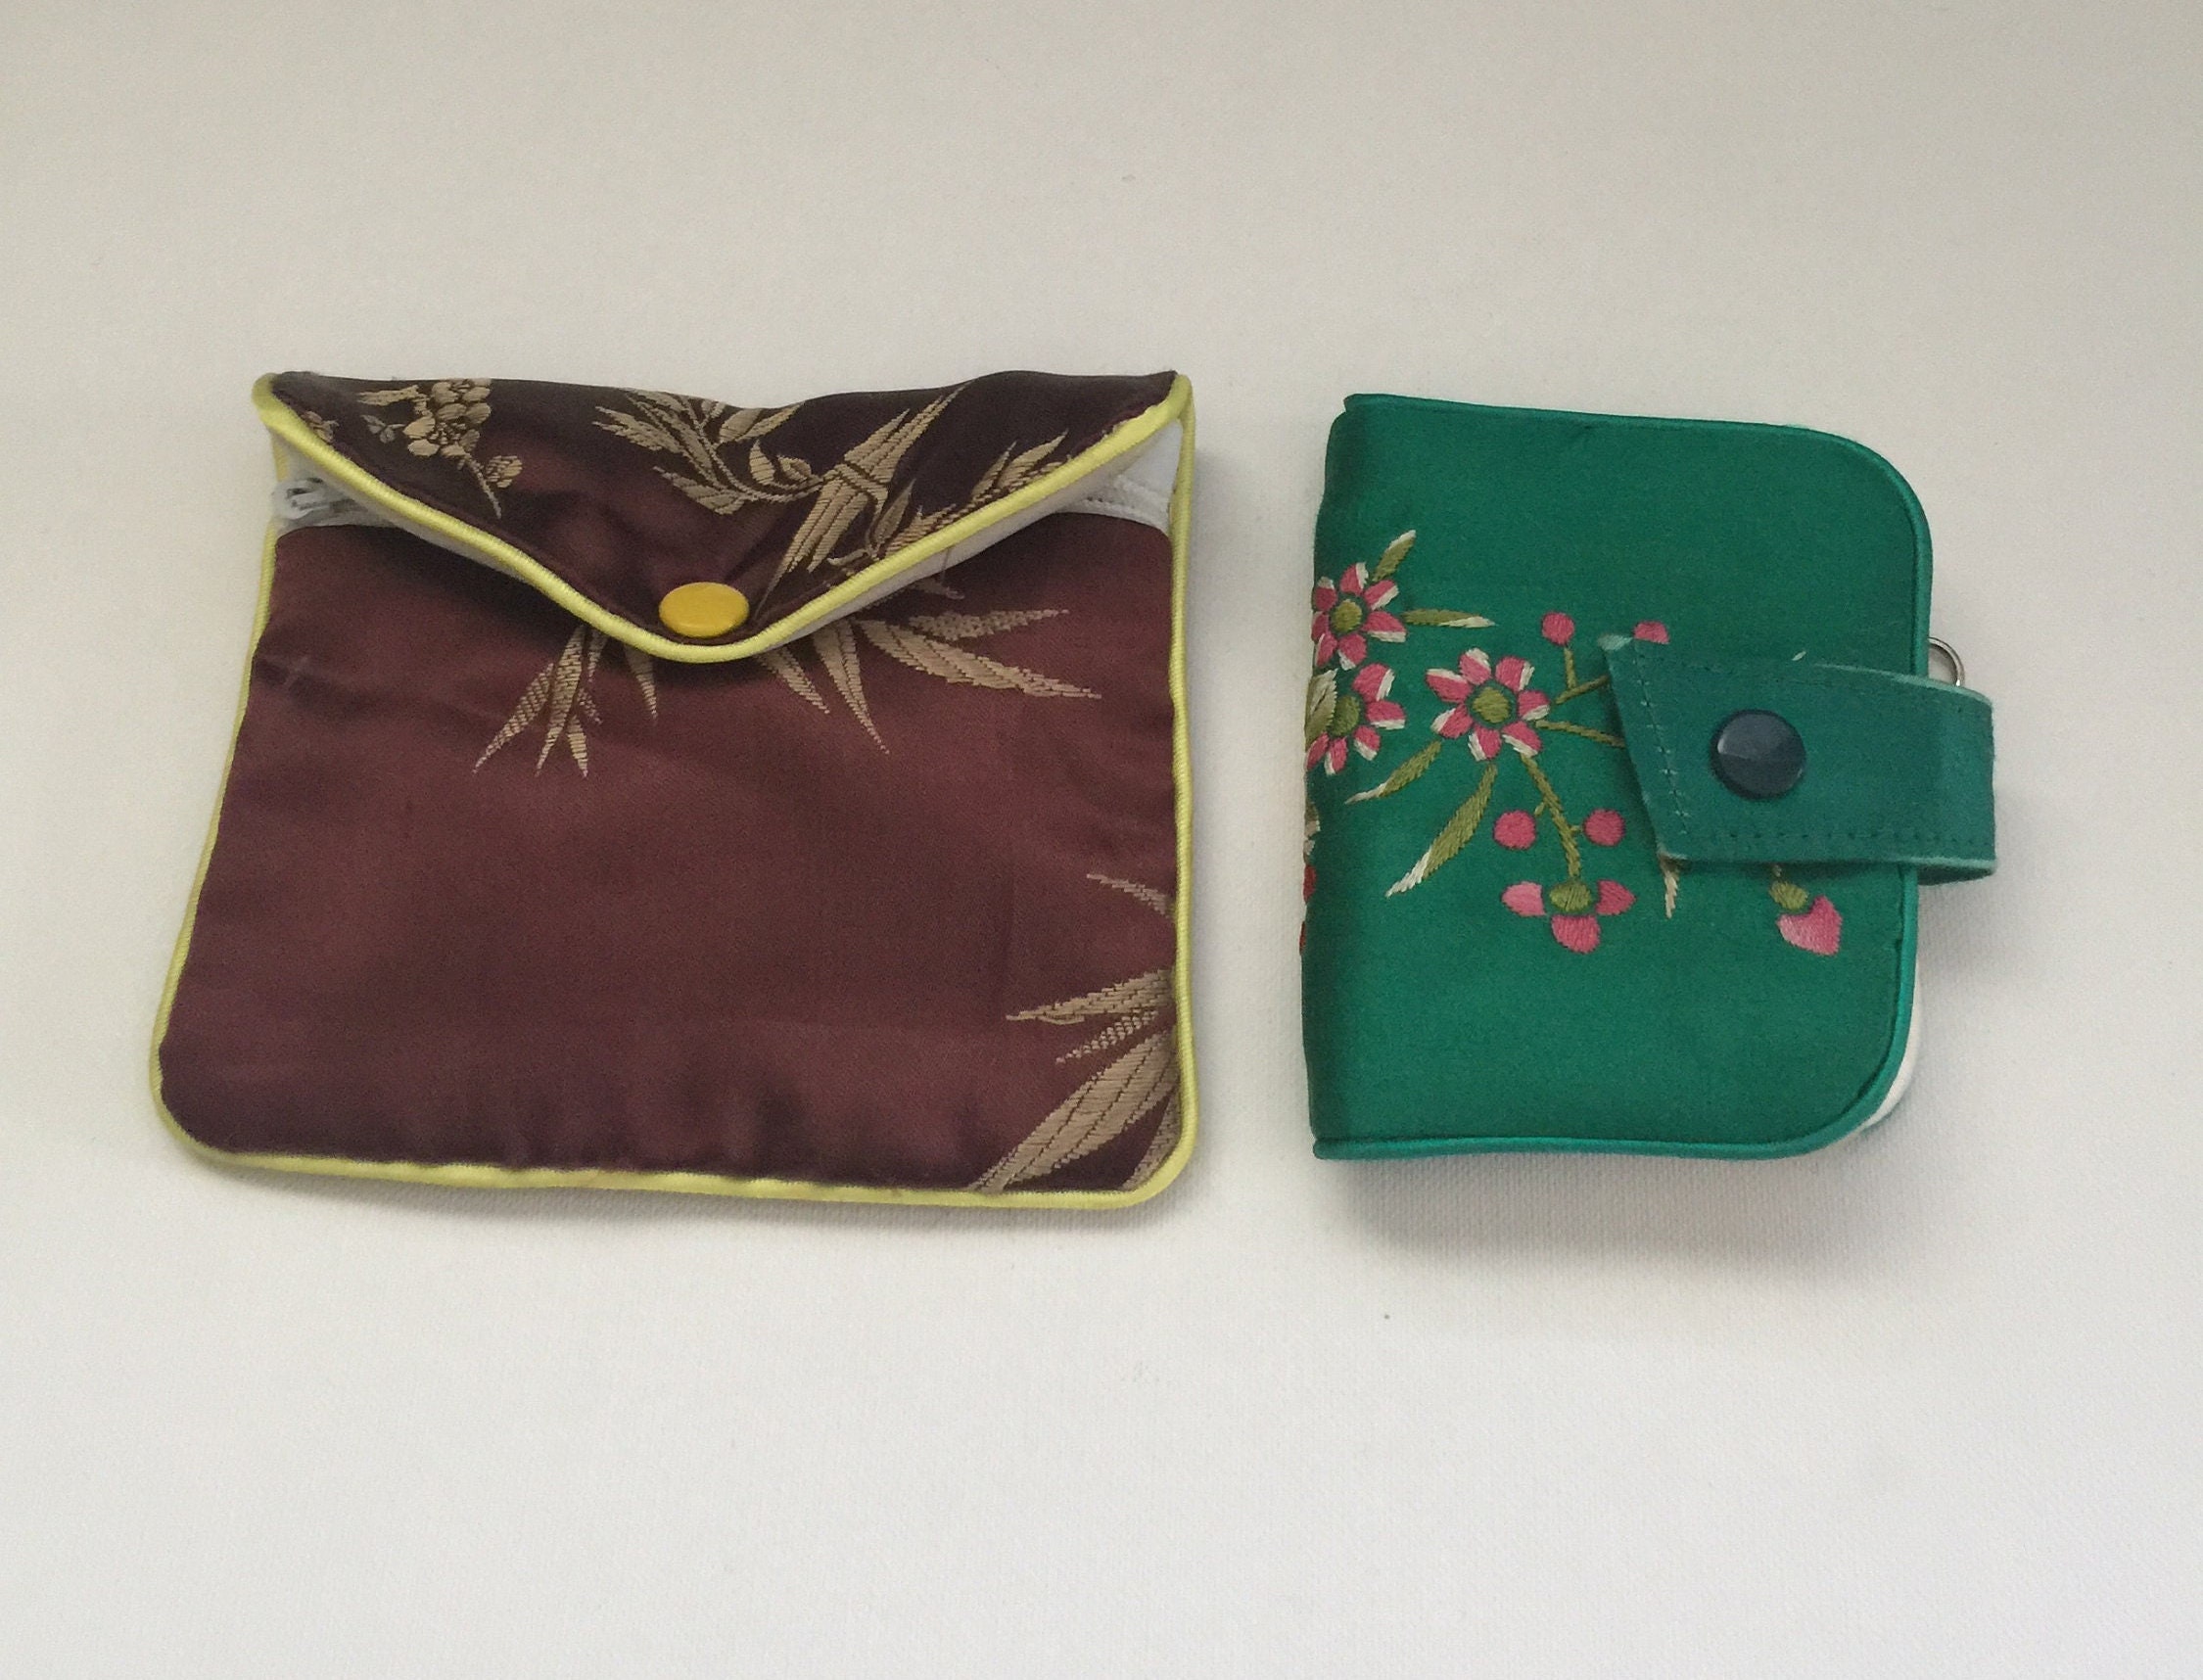 Recycled Silk Sari Hand Made Gift & Crystal Pouches, Bags, Healing Pouches,  Jewellery Pouch, Presents, Silk Saree Pouch, Gift Bags, 4x6 Inch 